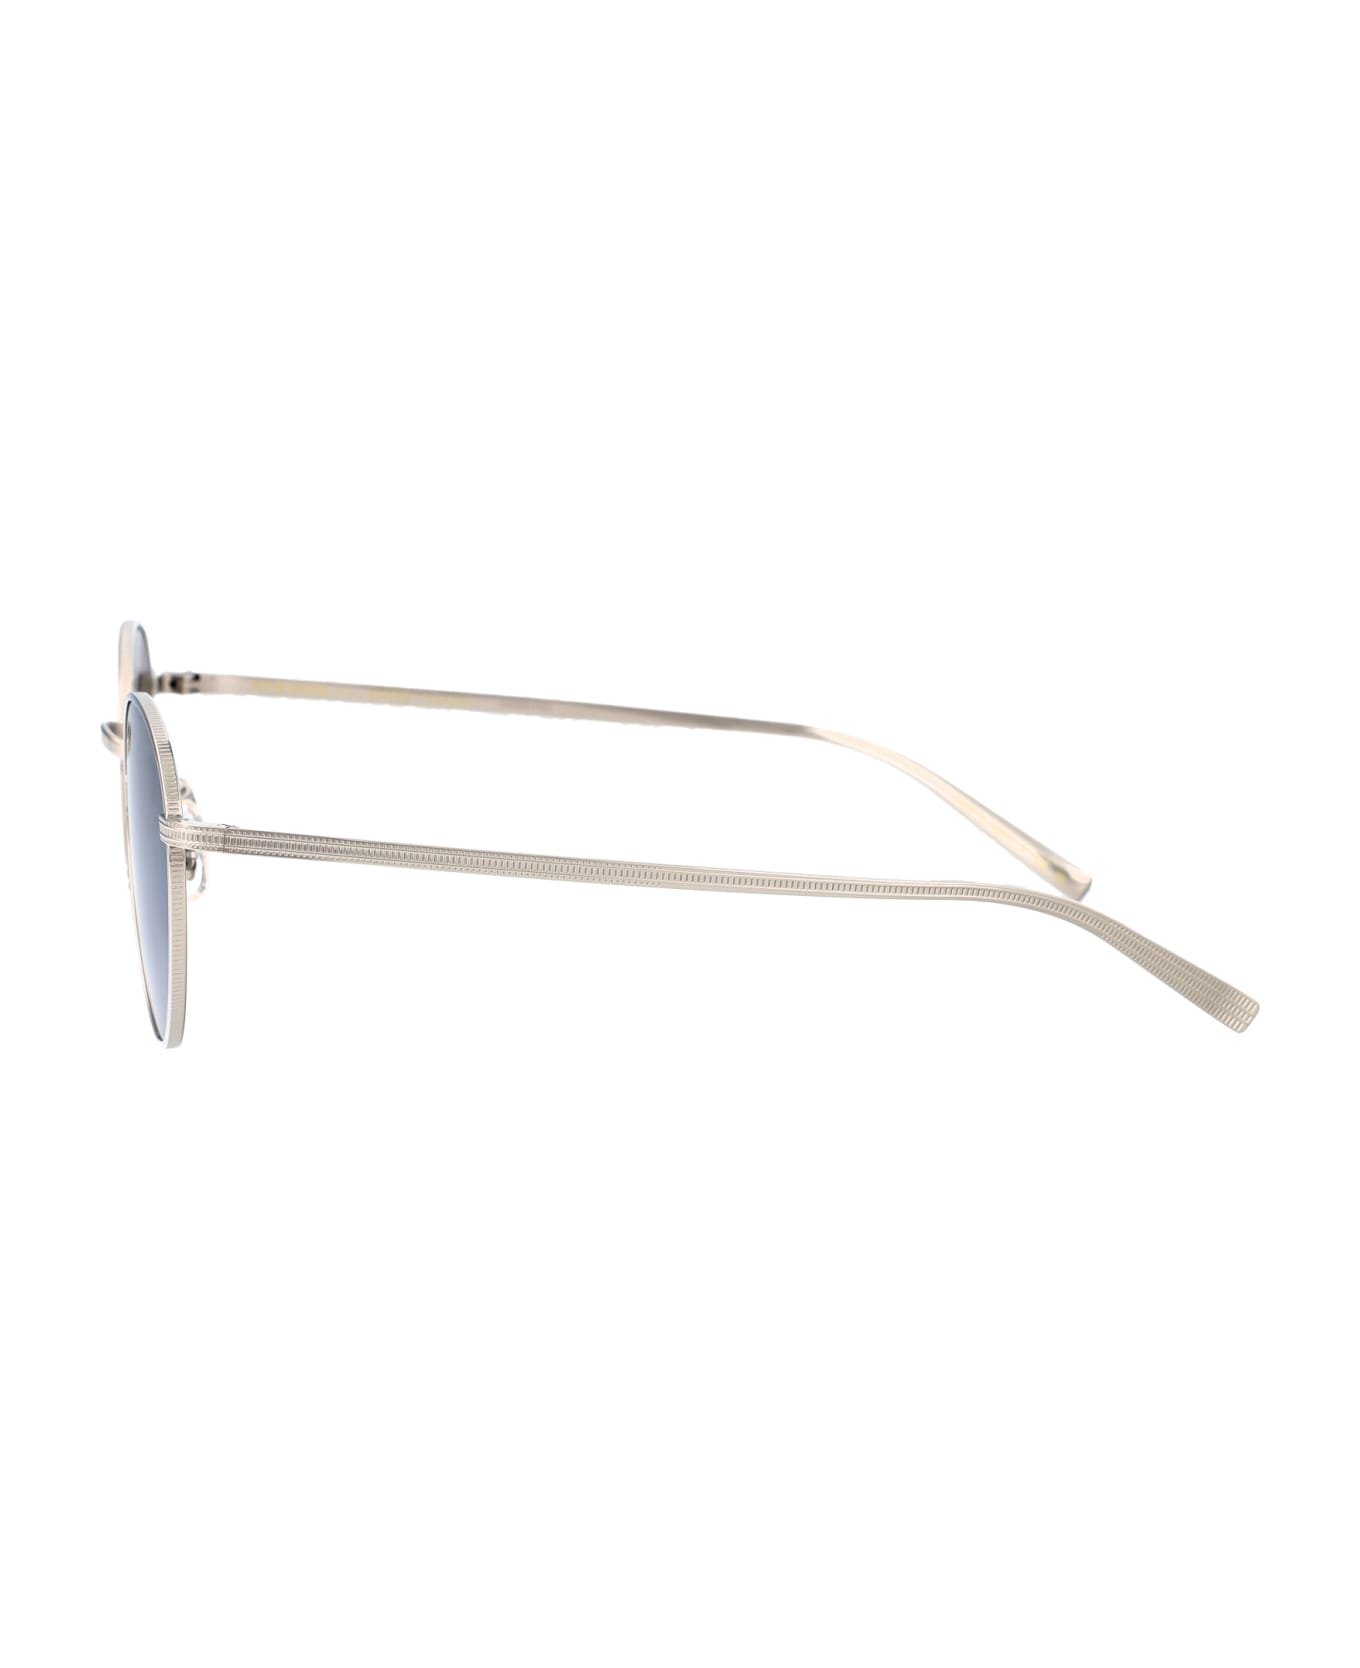 Oliver Peoples Rhydian Sunglasses - 5036W5 Silver